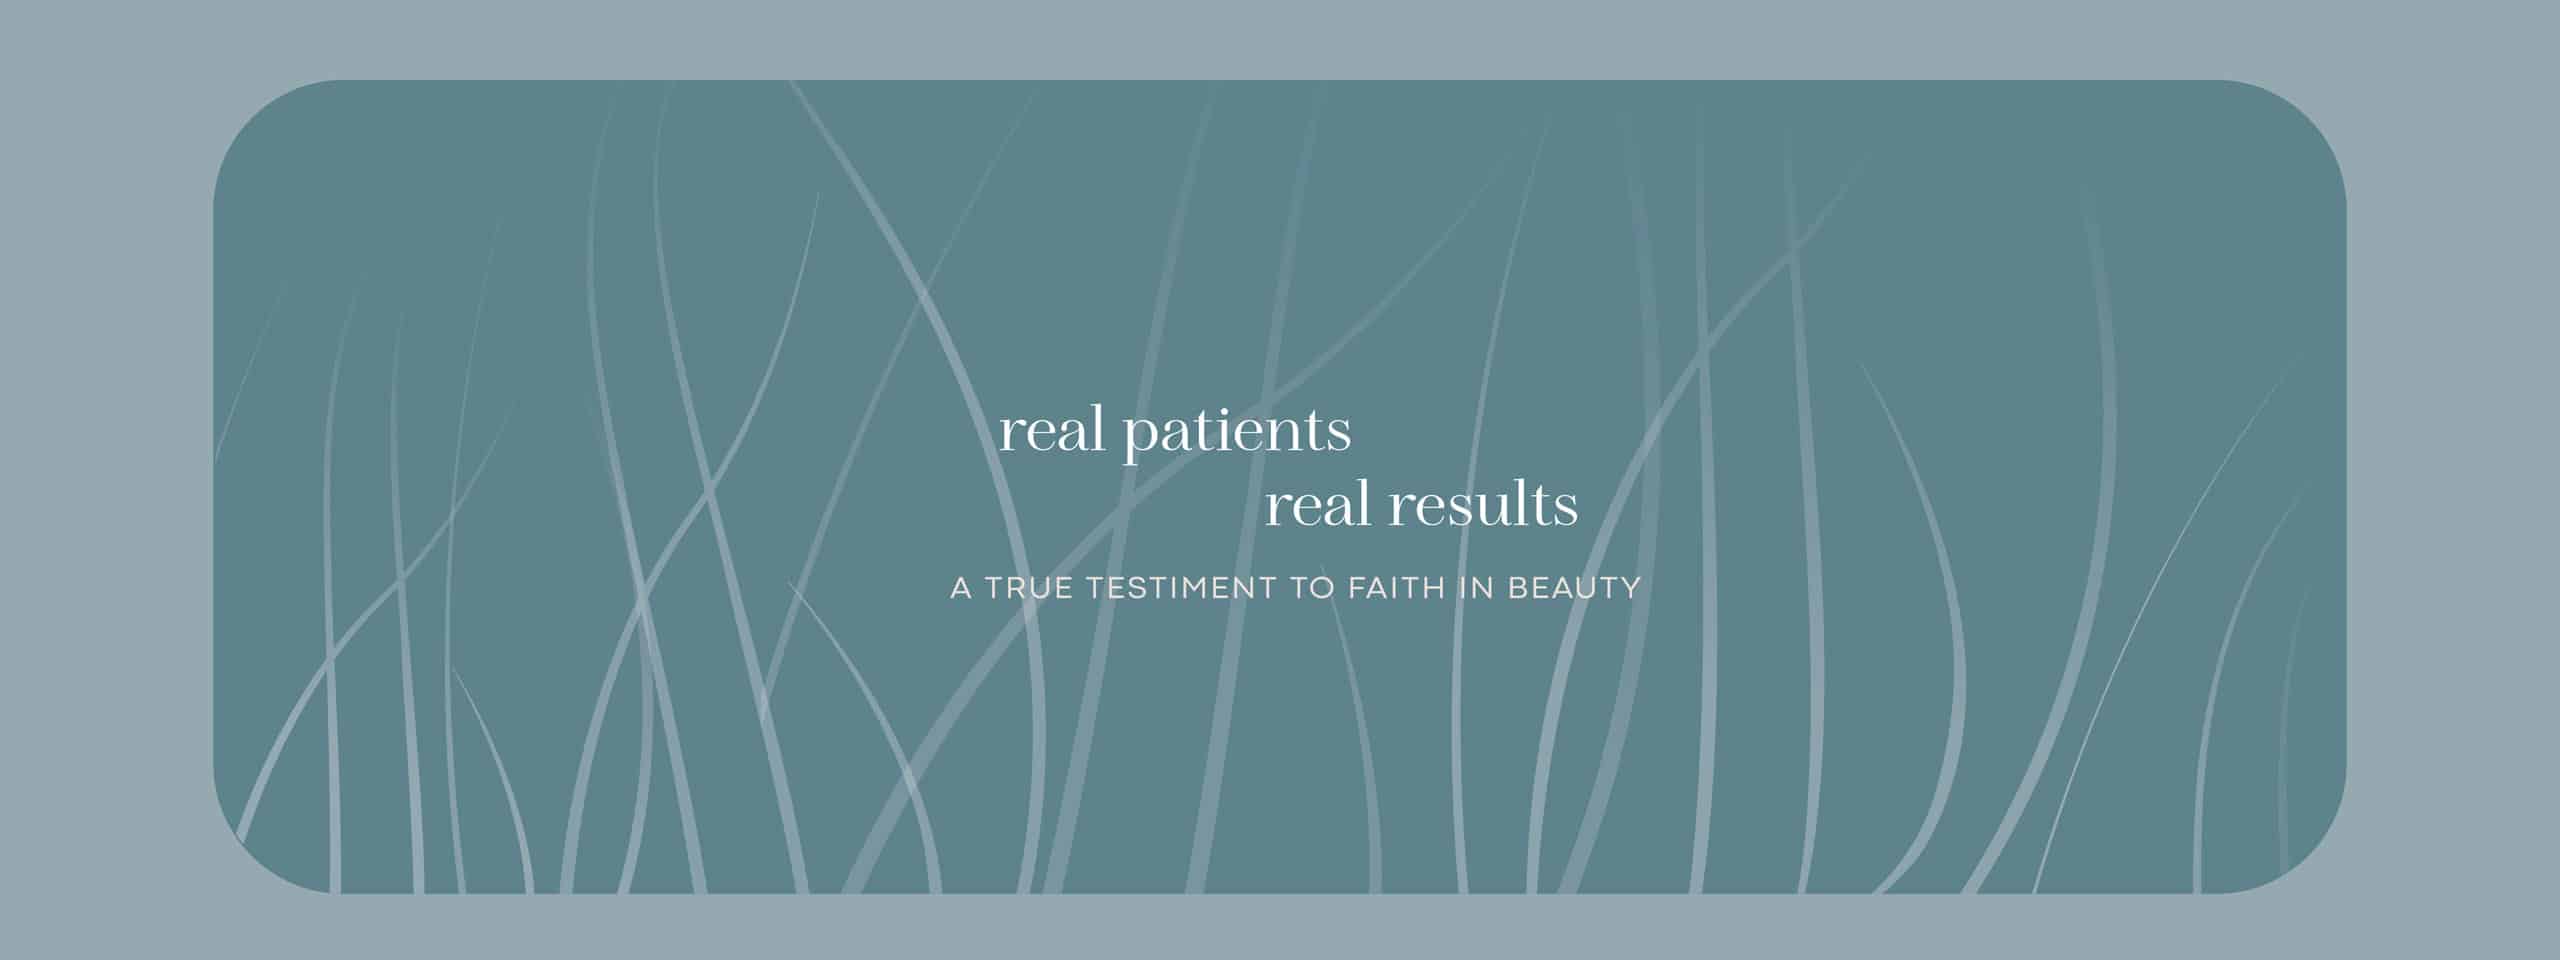 Before and After Photos of real patients at FBT Faith in Beauty Medical Aesthetics in Medway MA